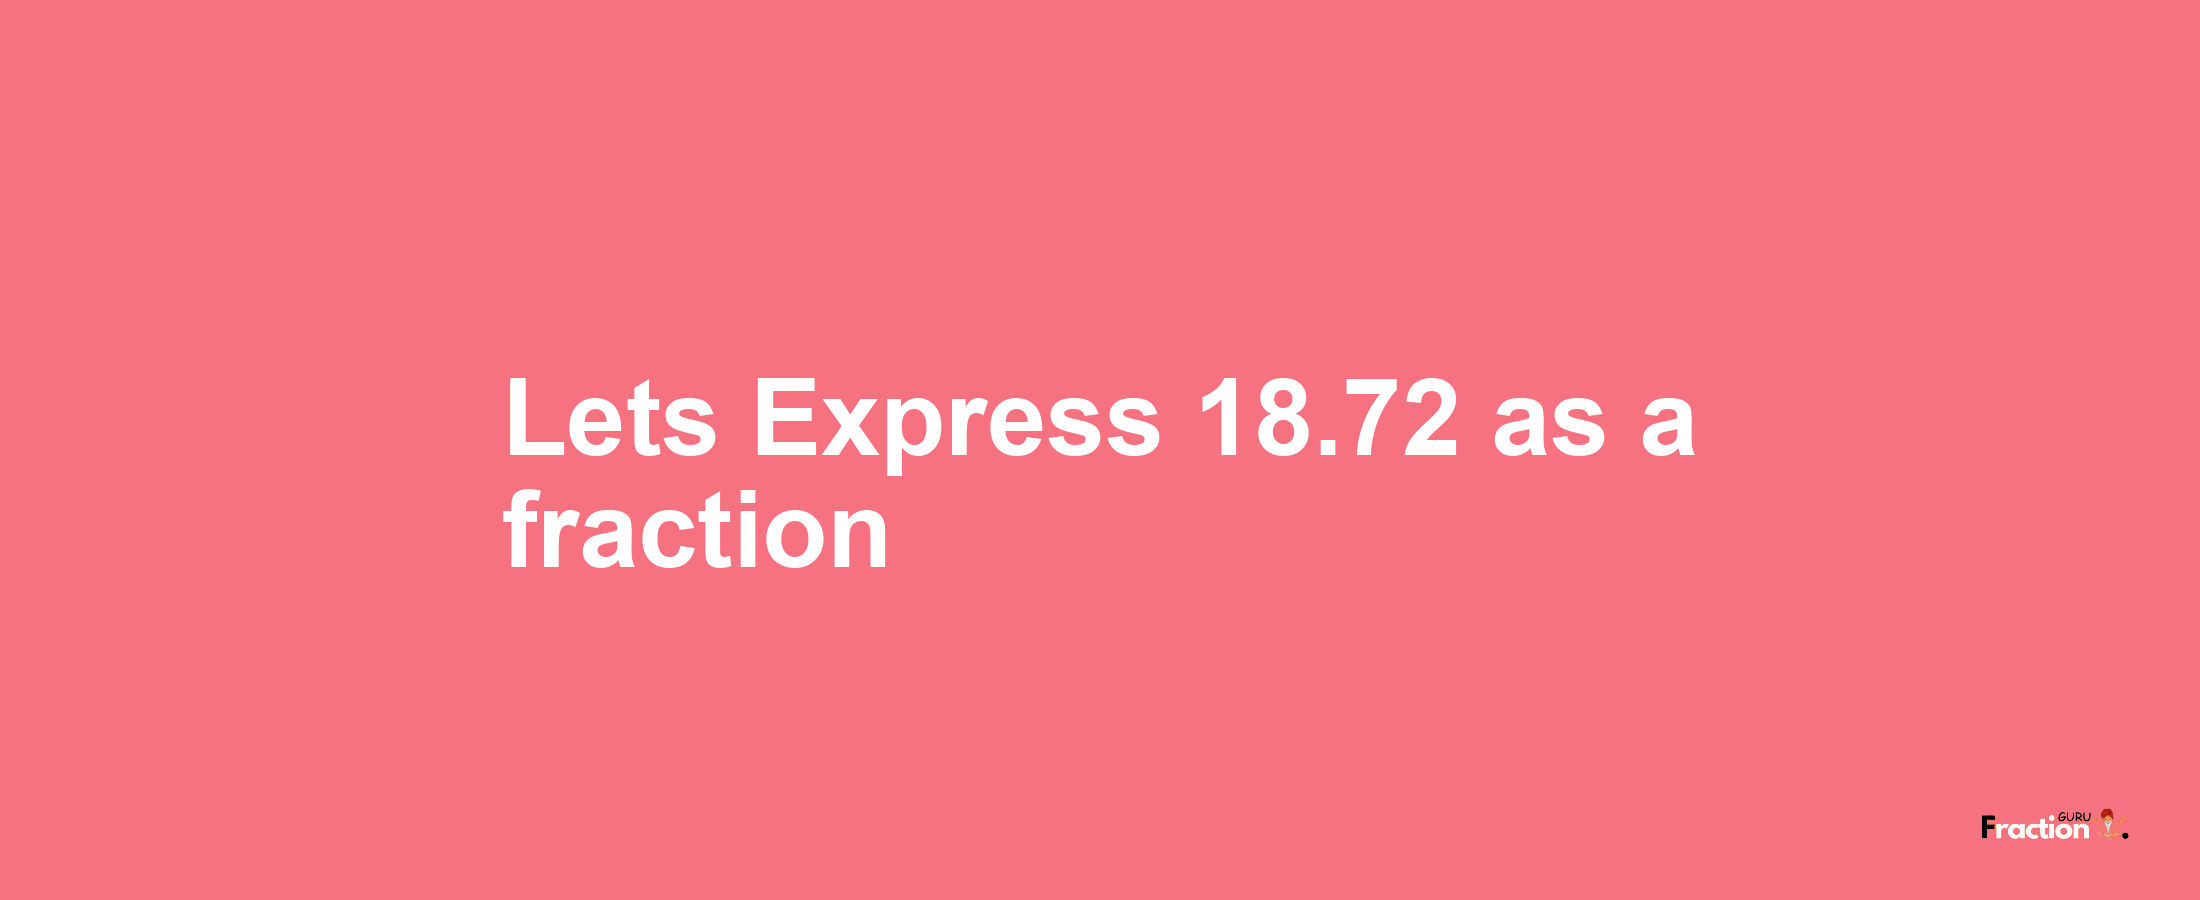 Lets Express 18.72 as afraction